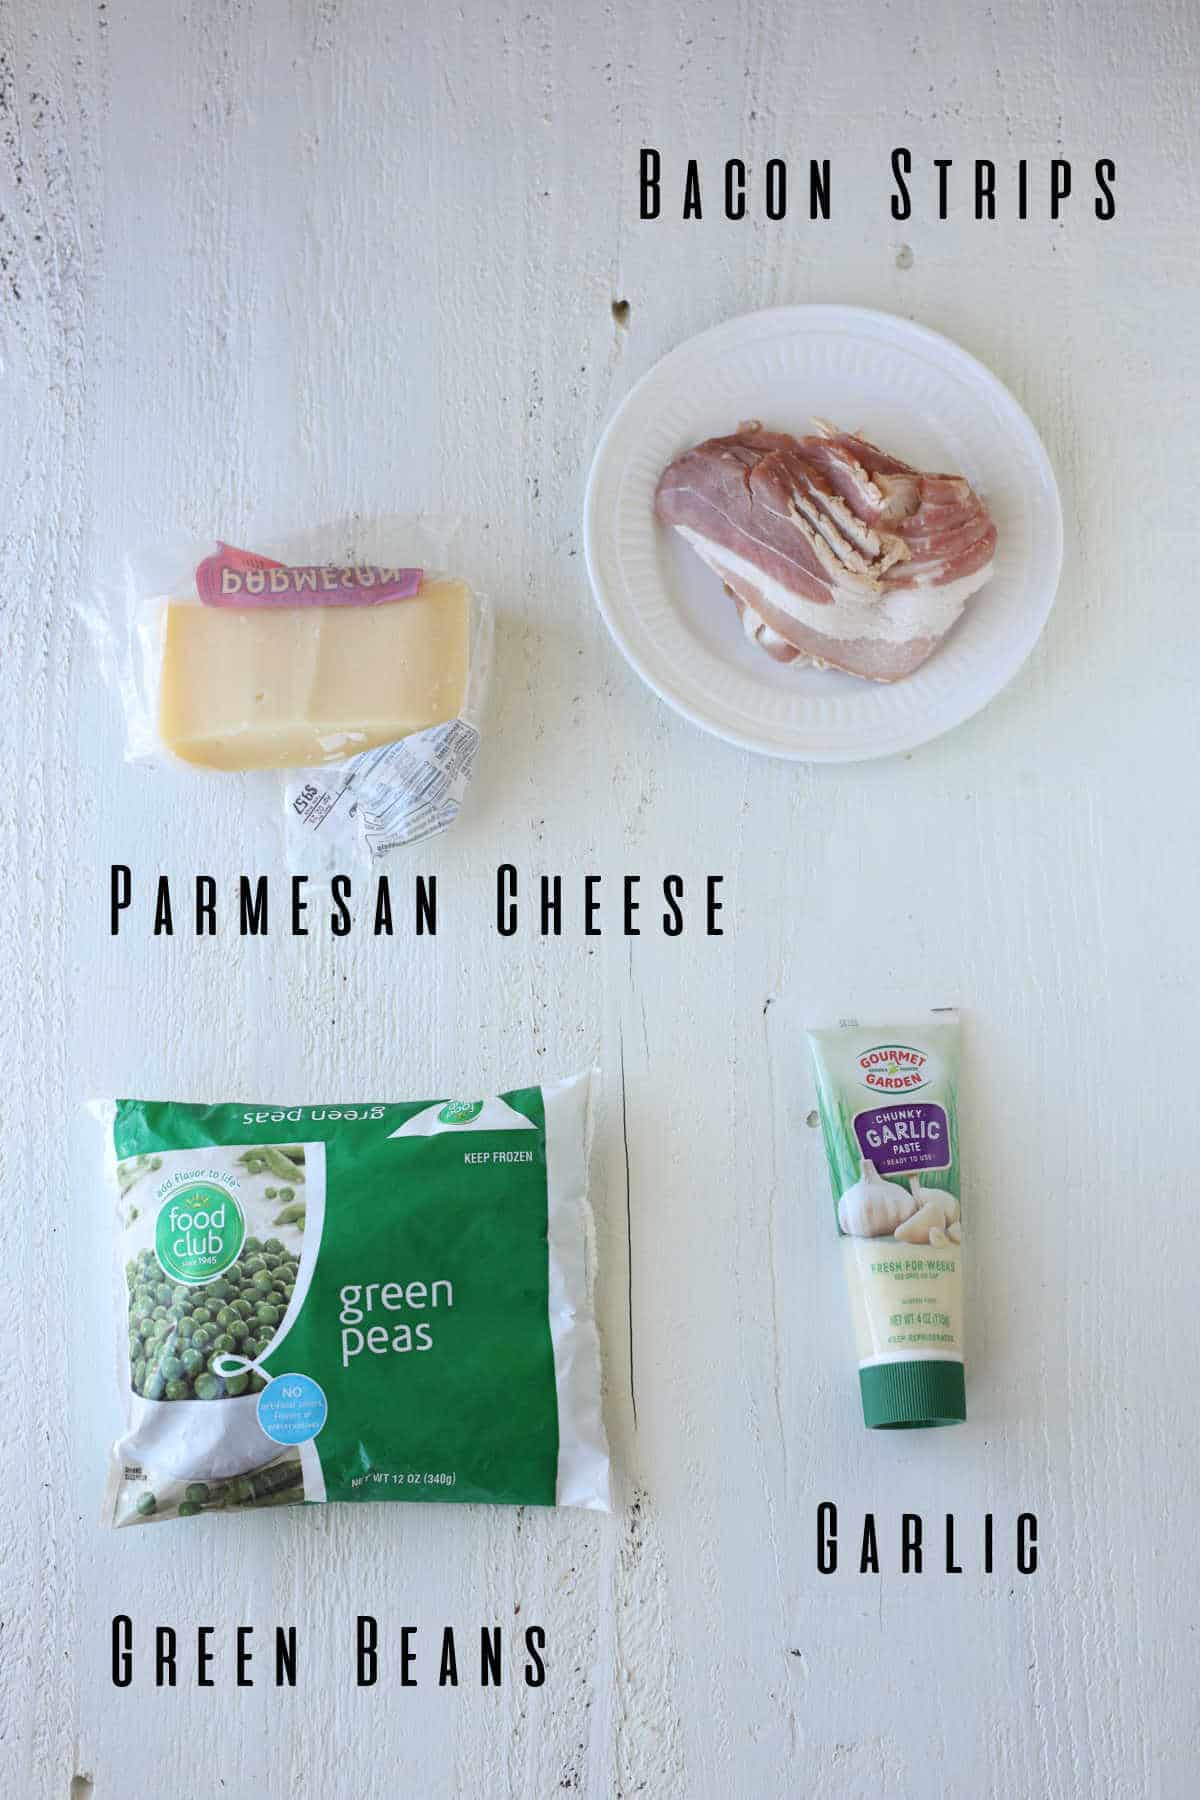 A package of frozen green peas, a tube of garlic paste, slices of bacon, and parmesan cheese.